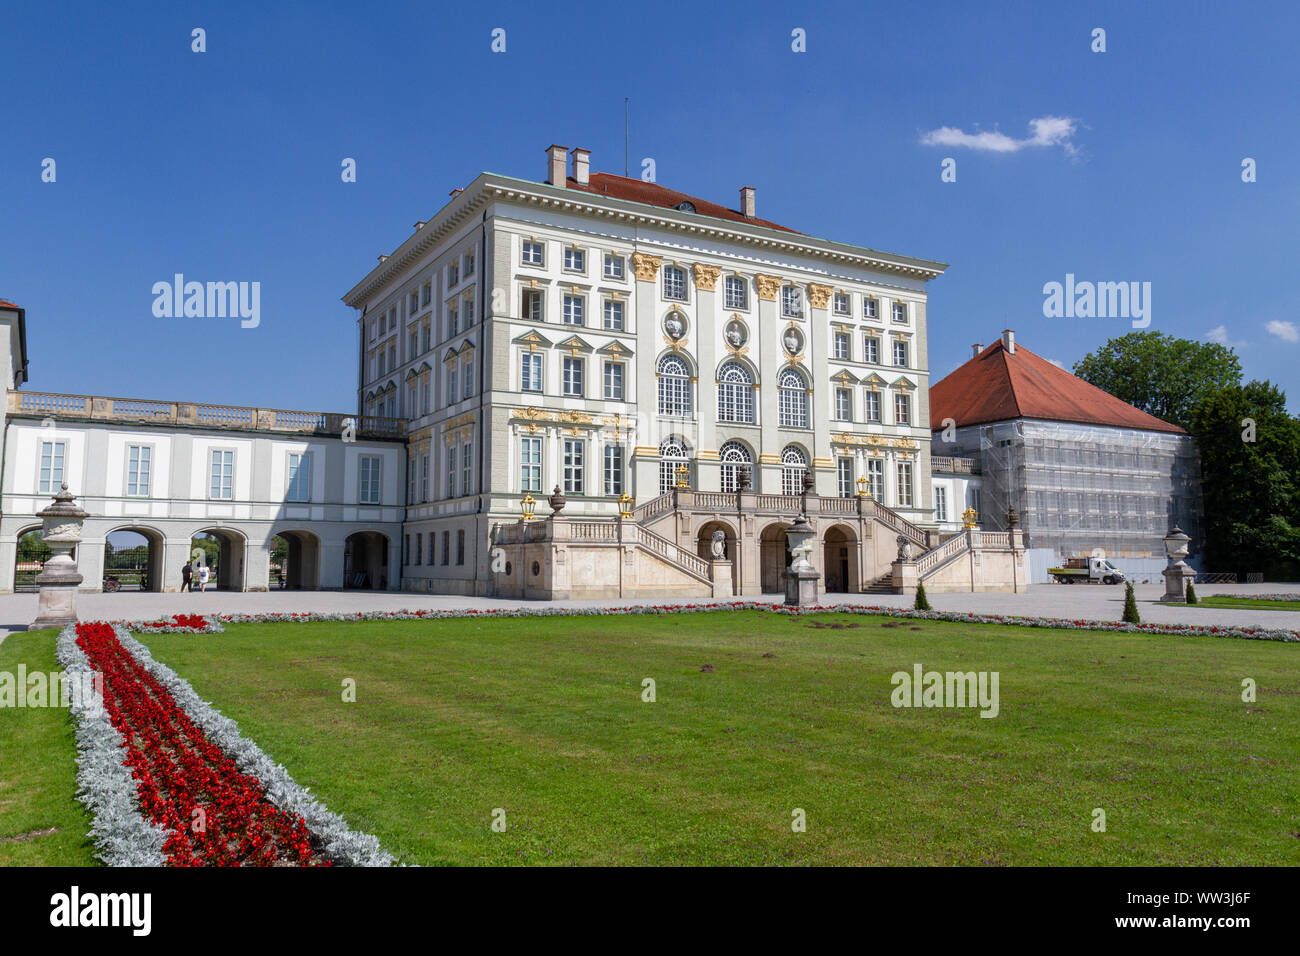 View of Nymphenburg Palace from the grounds (Schloss Nymphenburg), Munich, Bavaria, Germany. Stock Photo